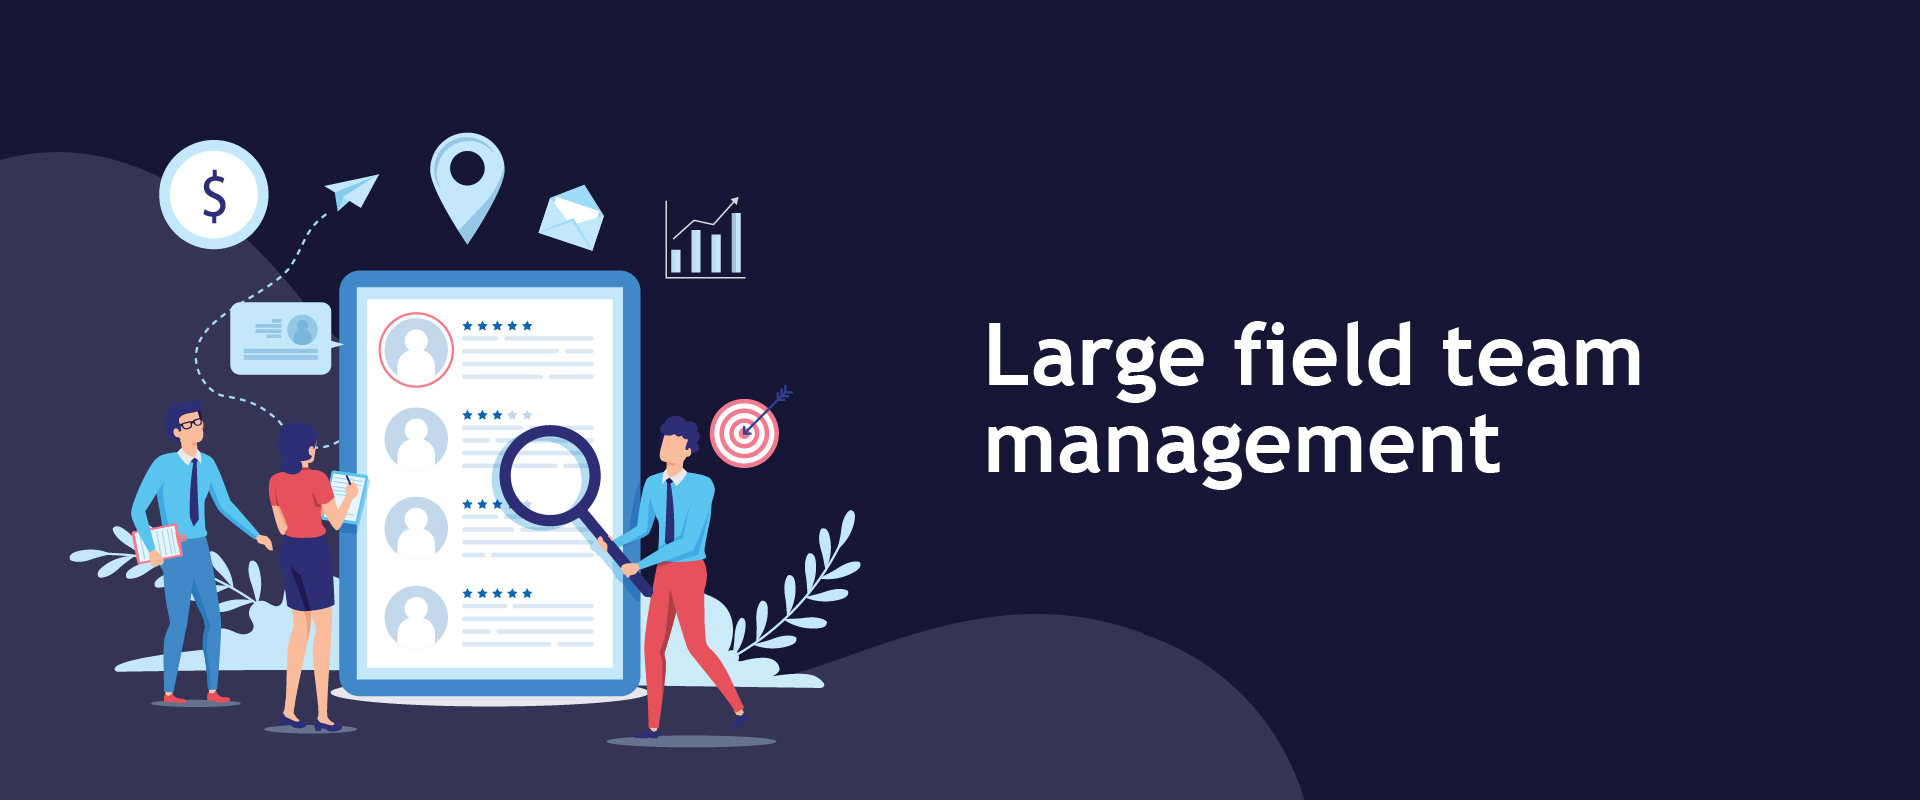 How Bsharp does it: Large field team management